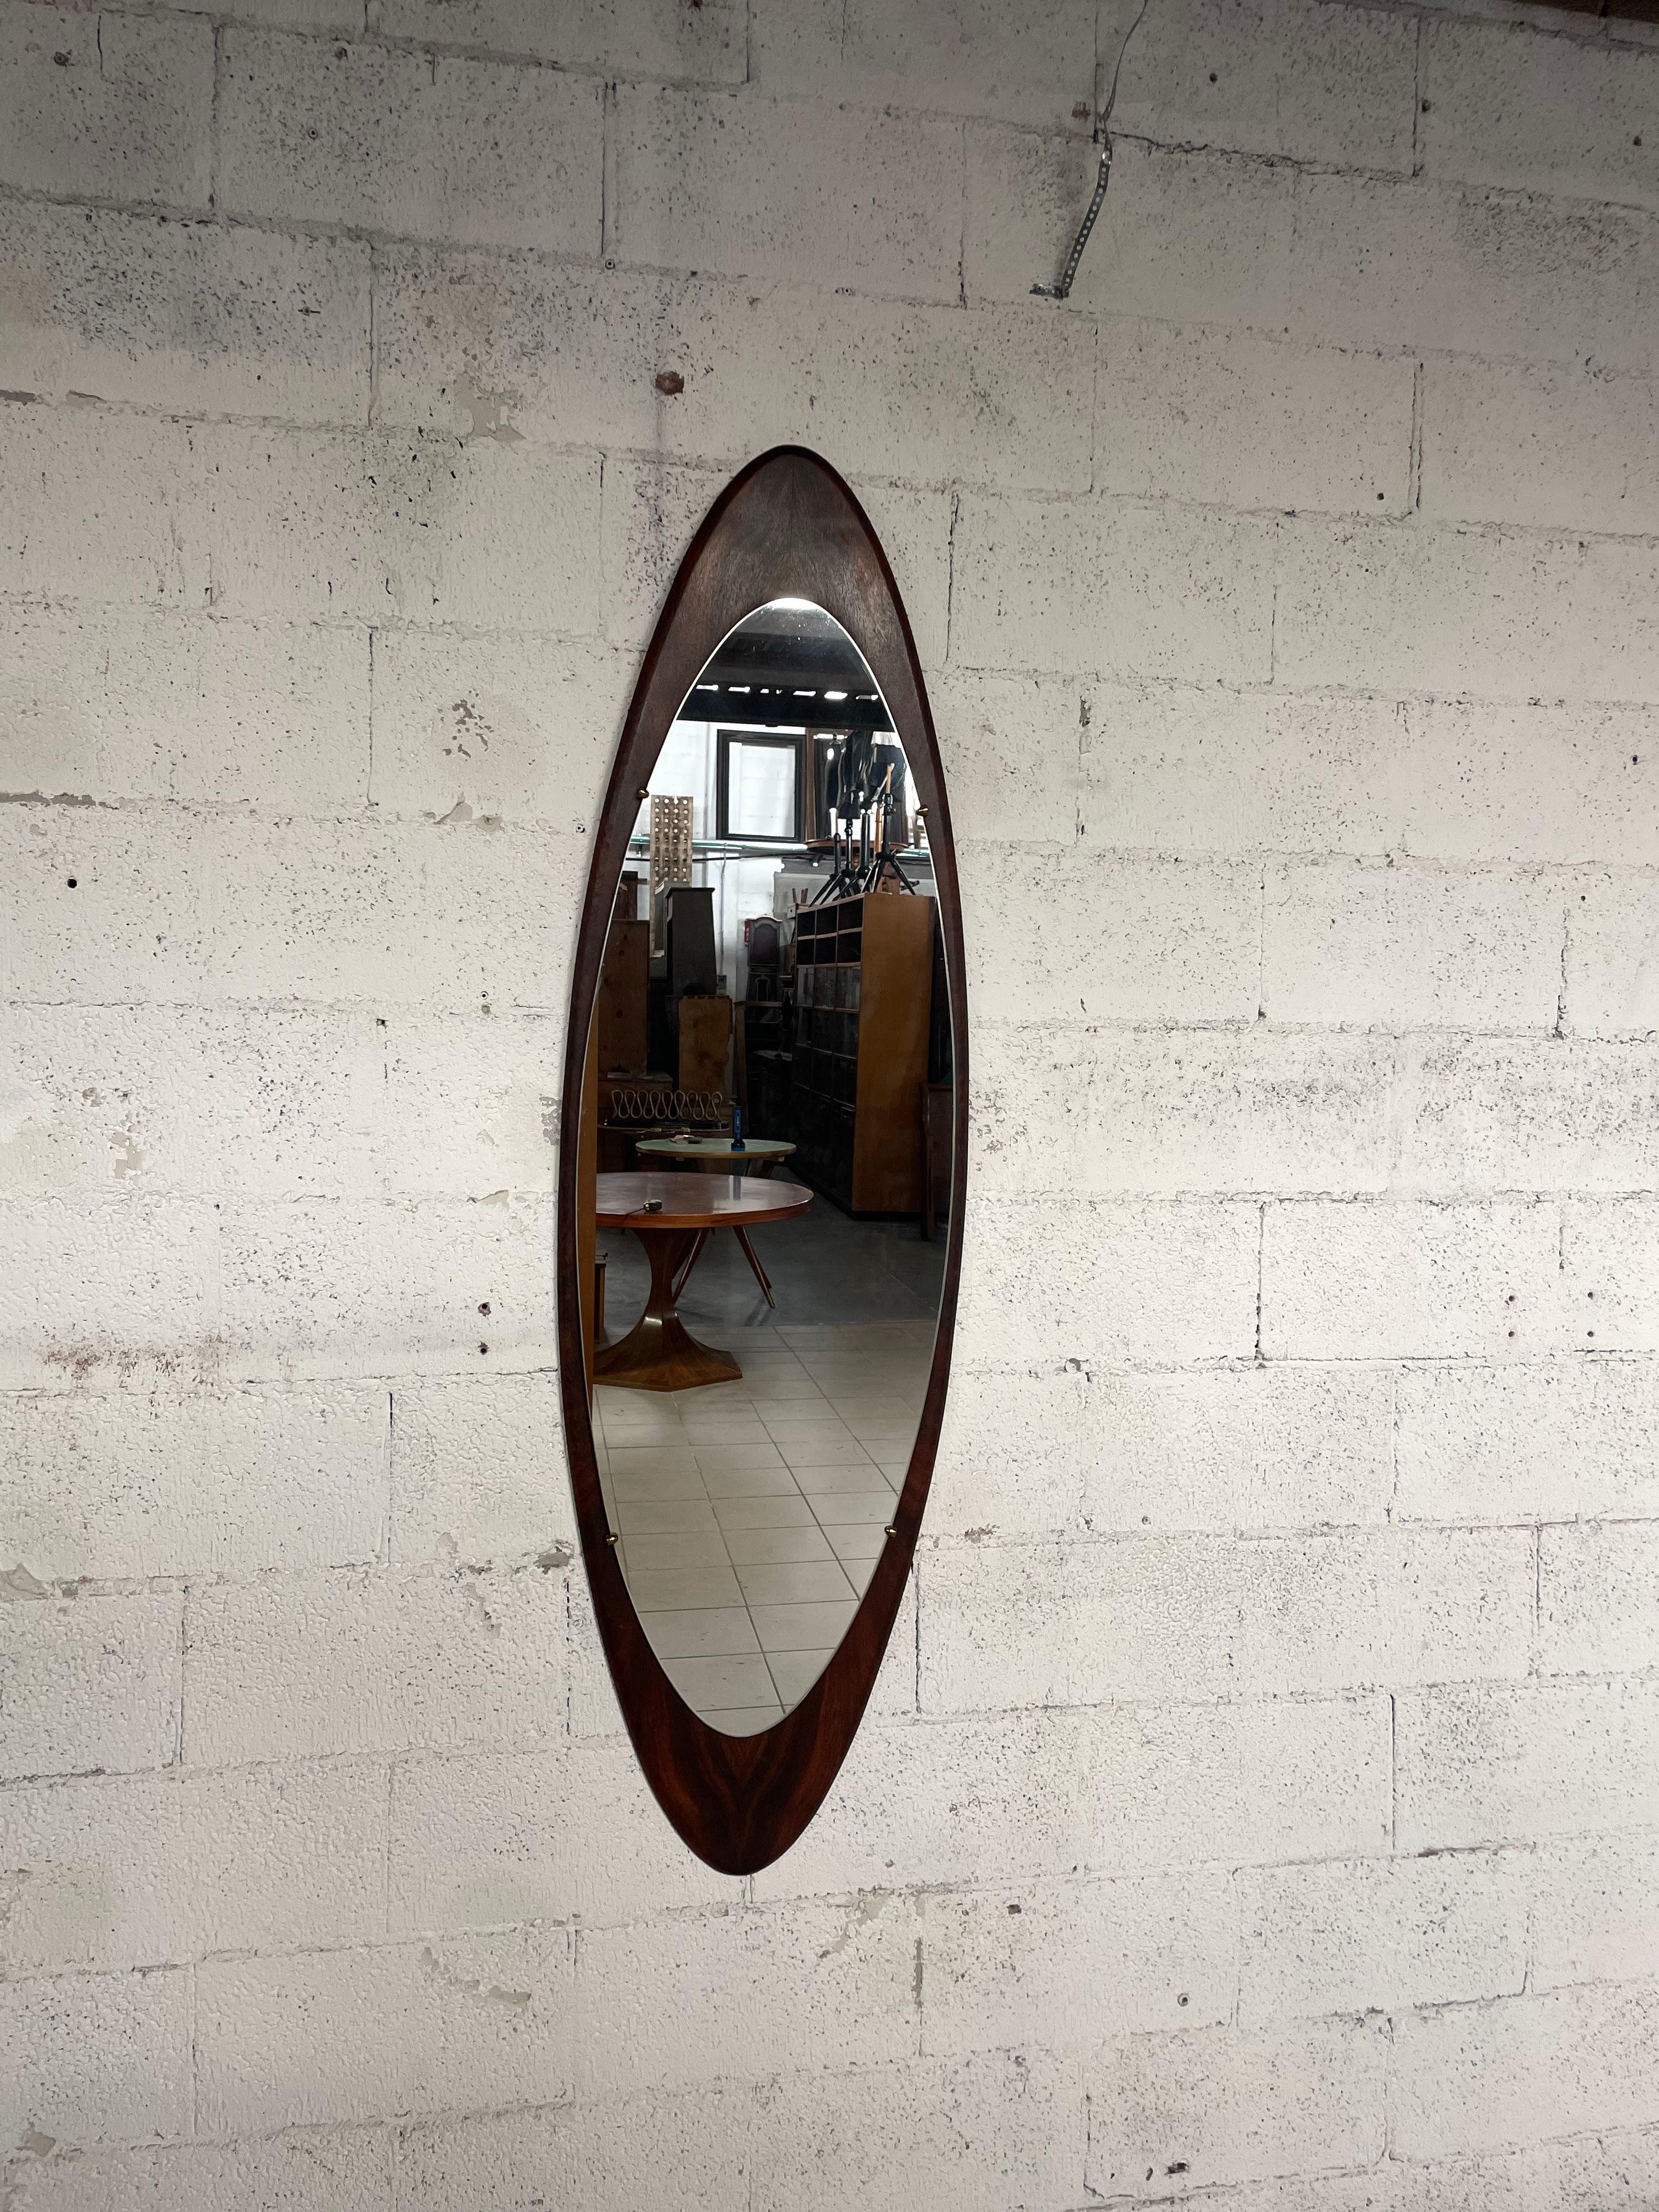 Large 1960s oval mirror of Italian manufacture.

Rosewood frame and mirror base, brass details lend elegance to this furniture.